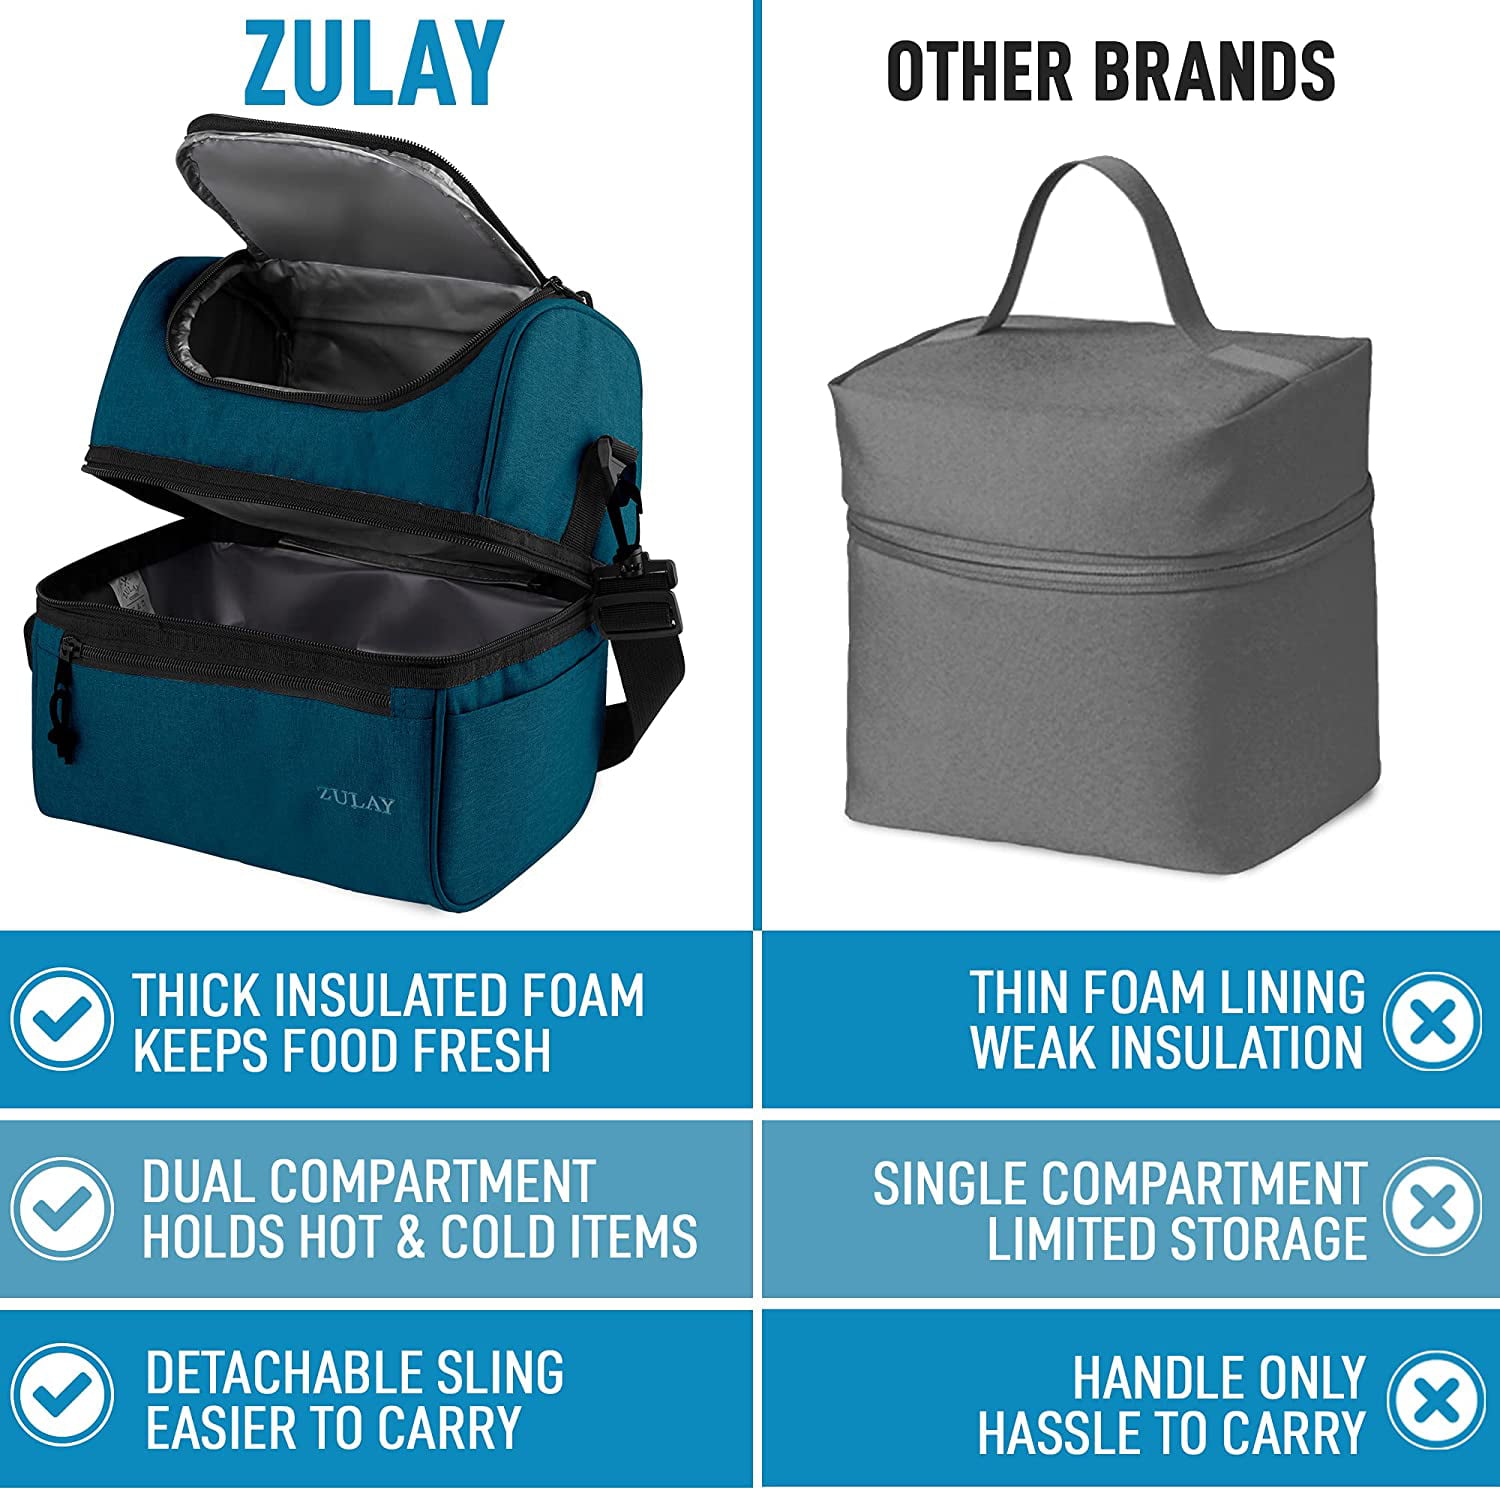 Zulay 2-Compartment Insulated Lunch Bag For Men & Women Leakproof Insulated Lunch Bags & Cooler Bag Women & Mens Lunchbox For Work & School Insulated Lunch Box Bag With Strap Caribbean Blue